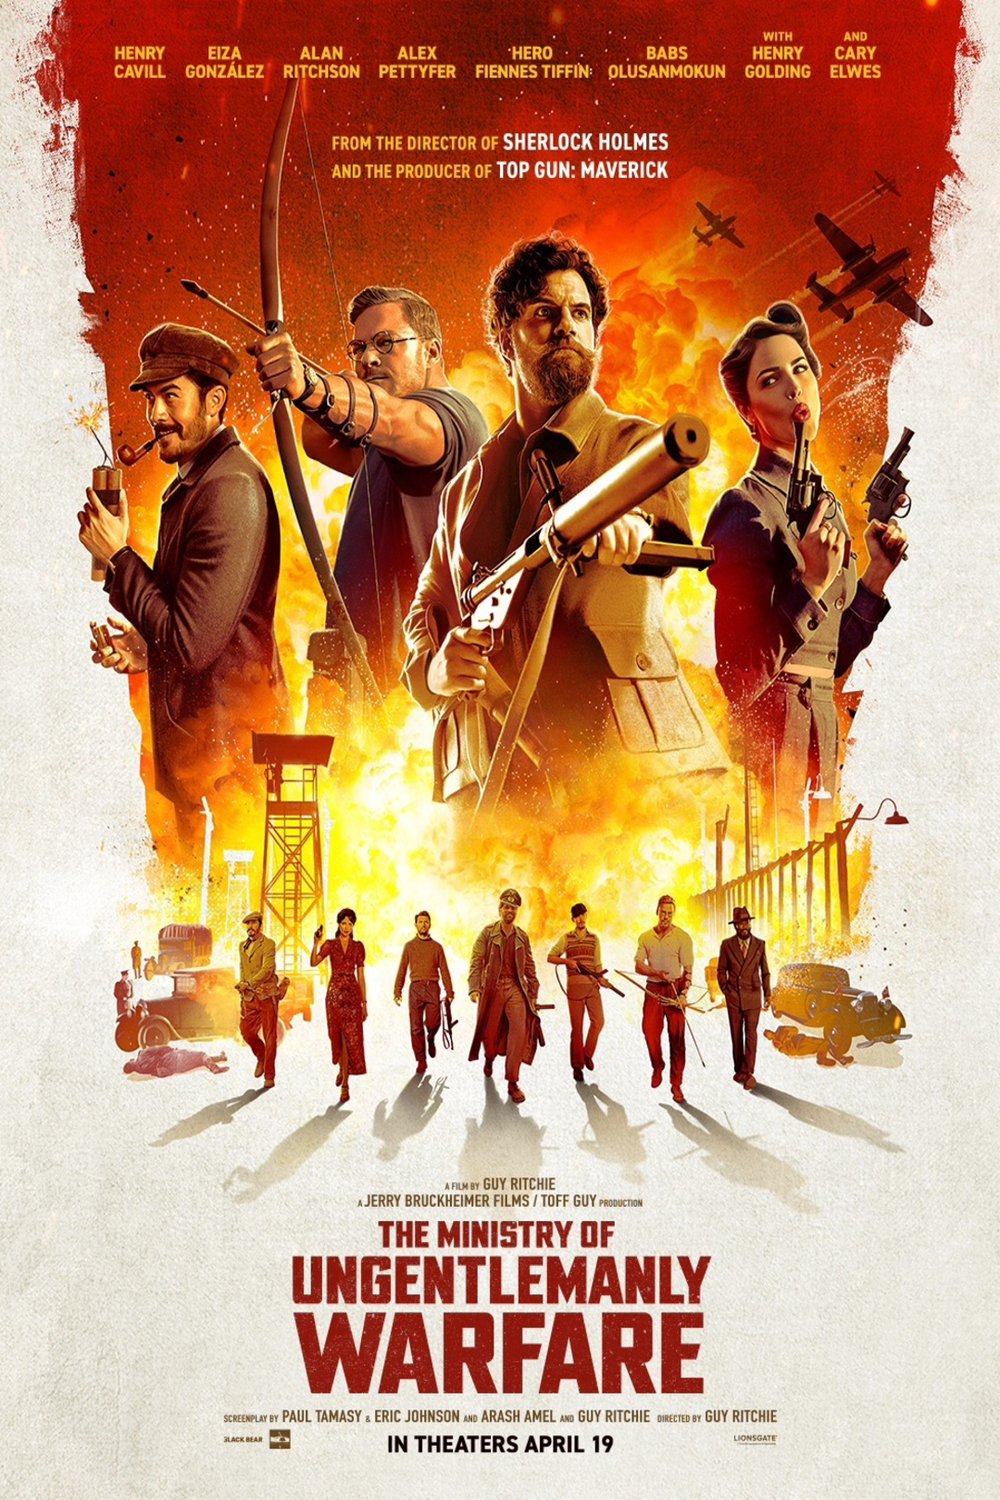 Poster of the movie The Ministry of Ungentlemanly Warfare